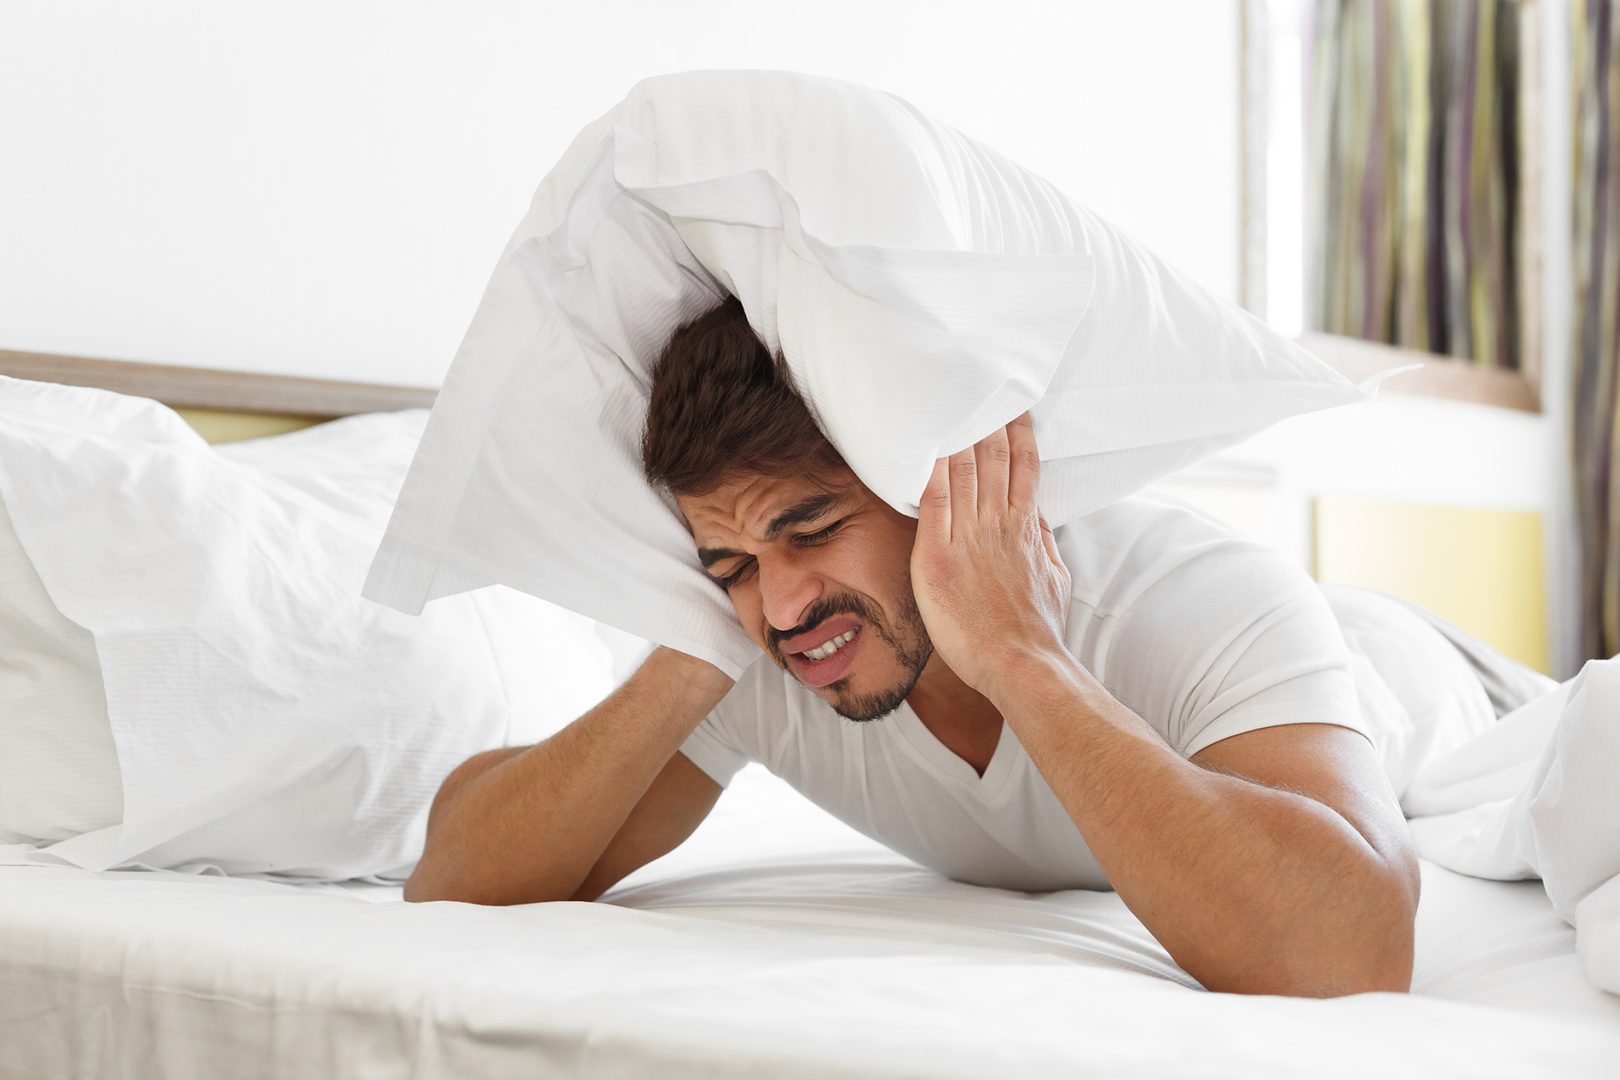 Sad man in bed covering head with pillow